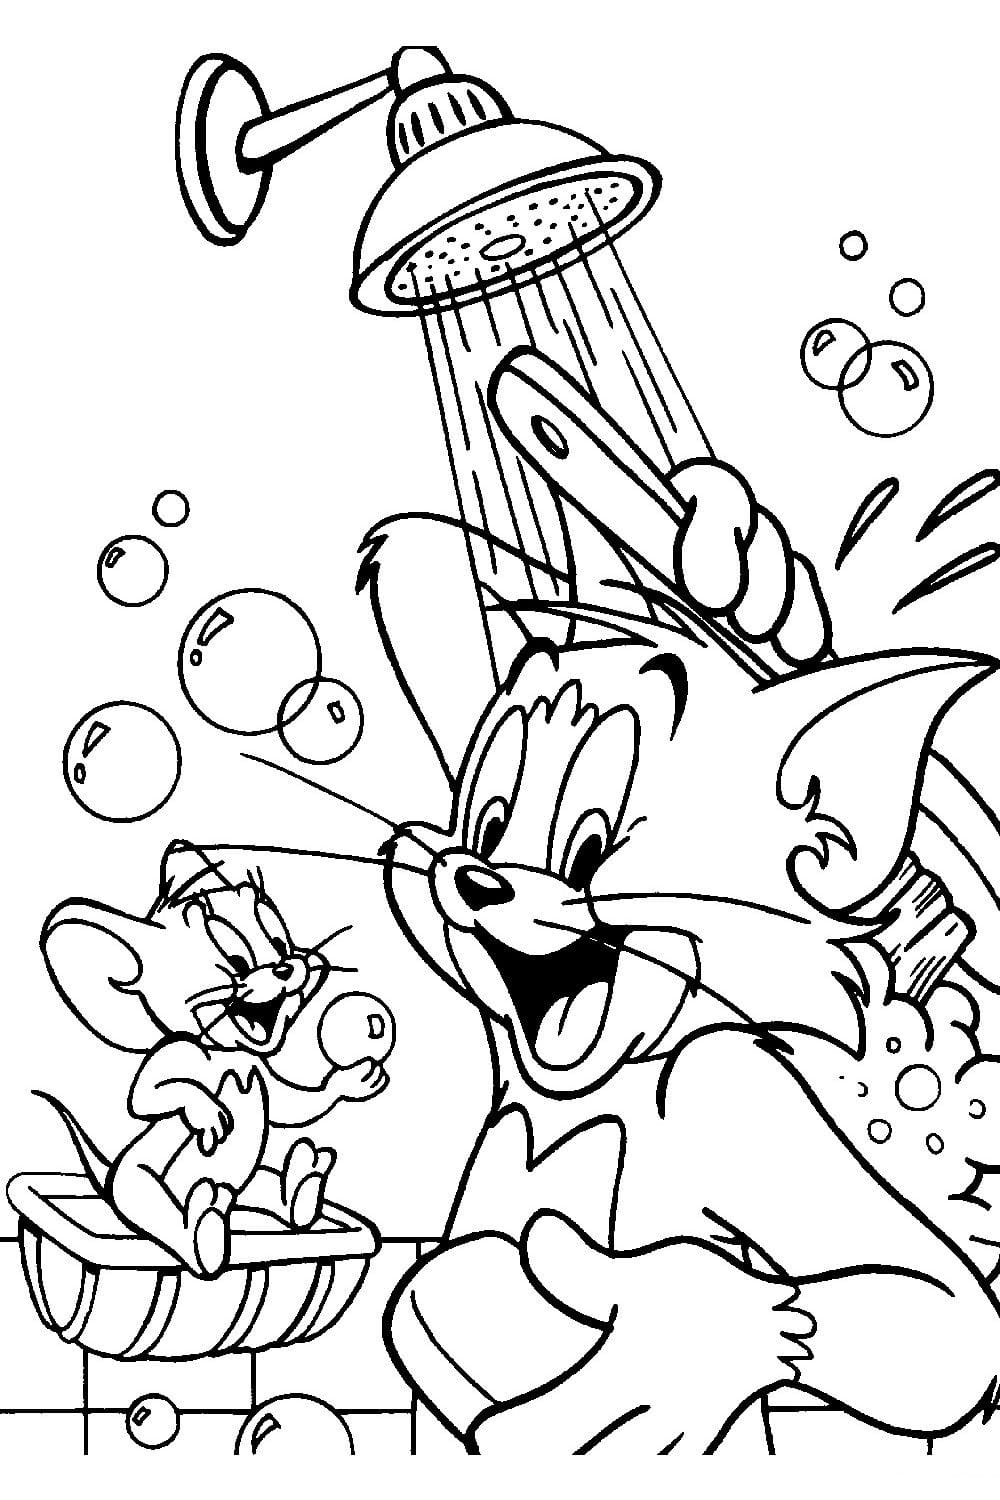 Tom and
  Jerry in a shower with soap bubbles 